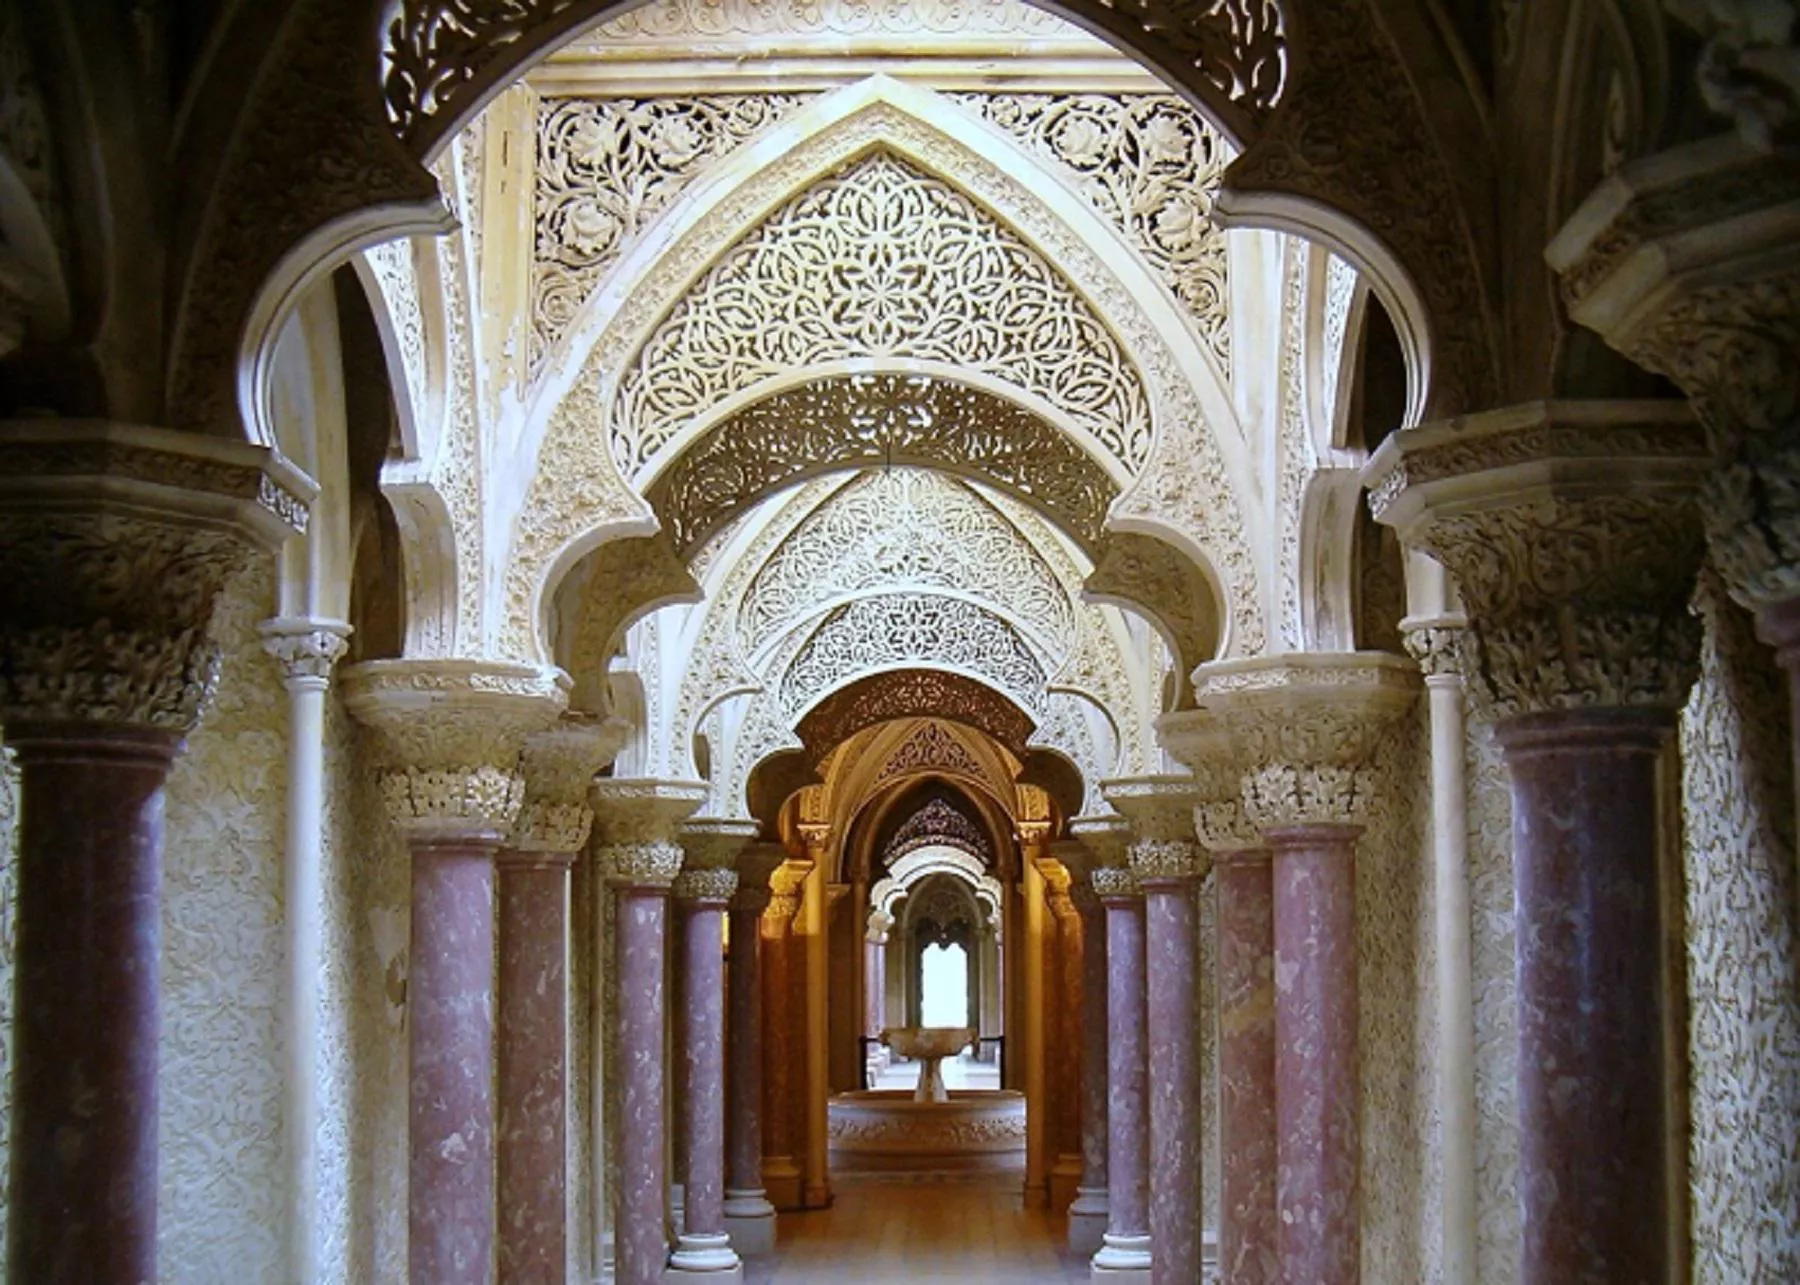 Image of detailed arches